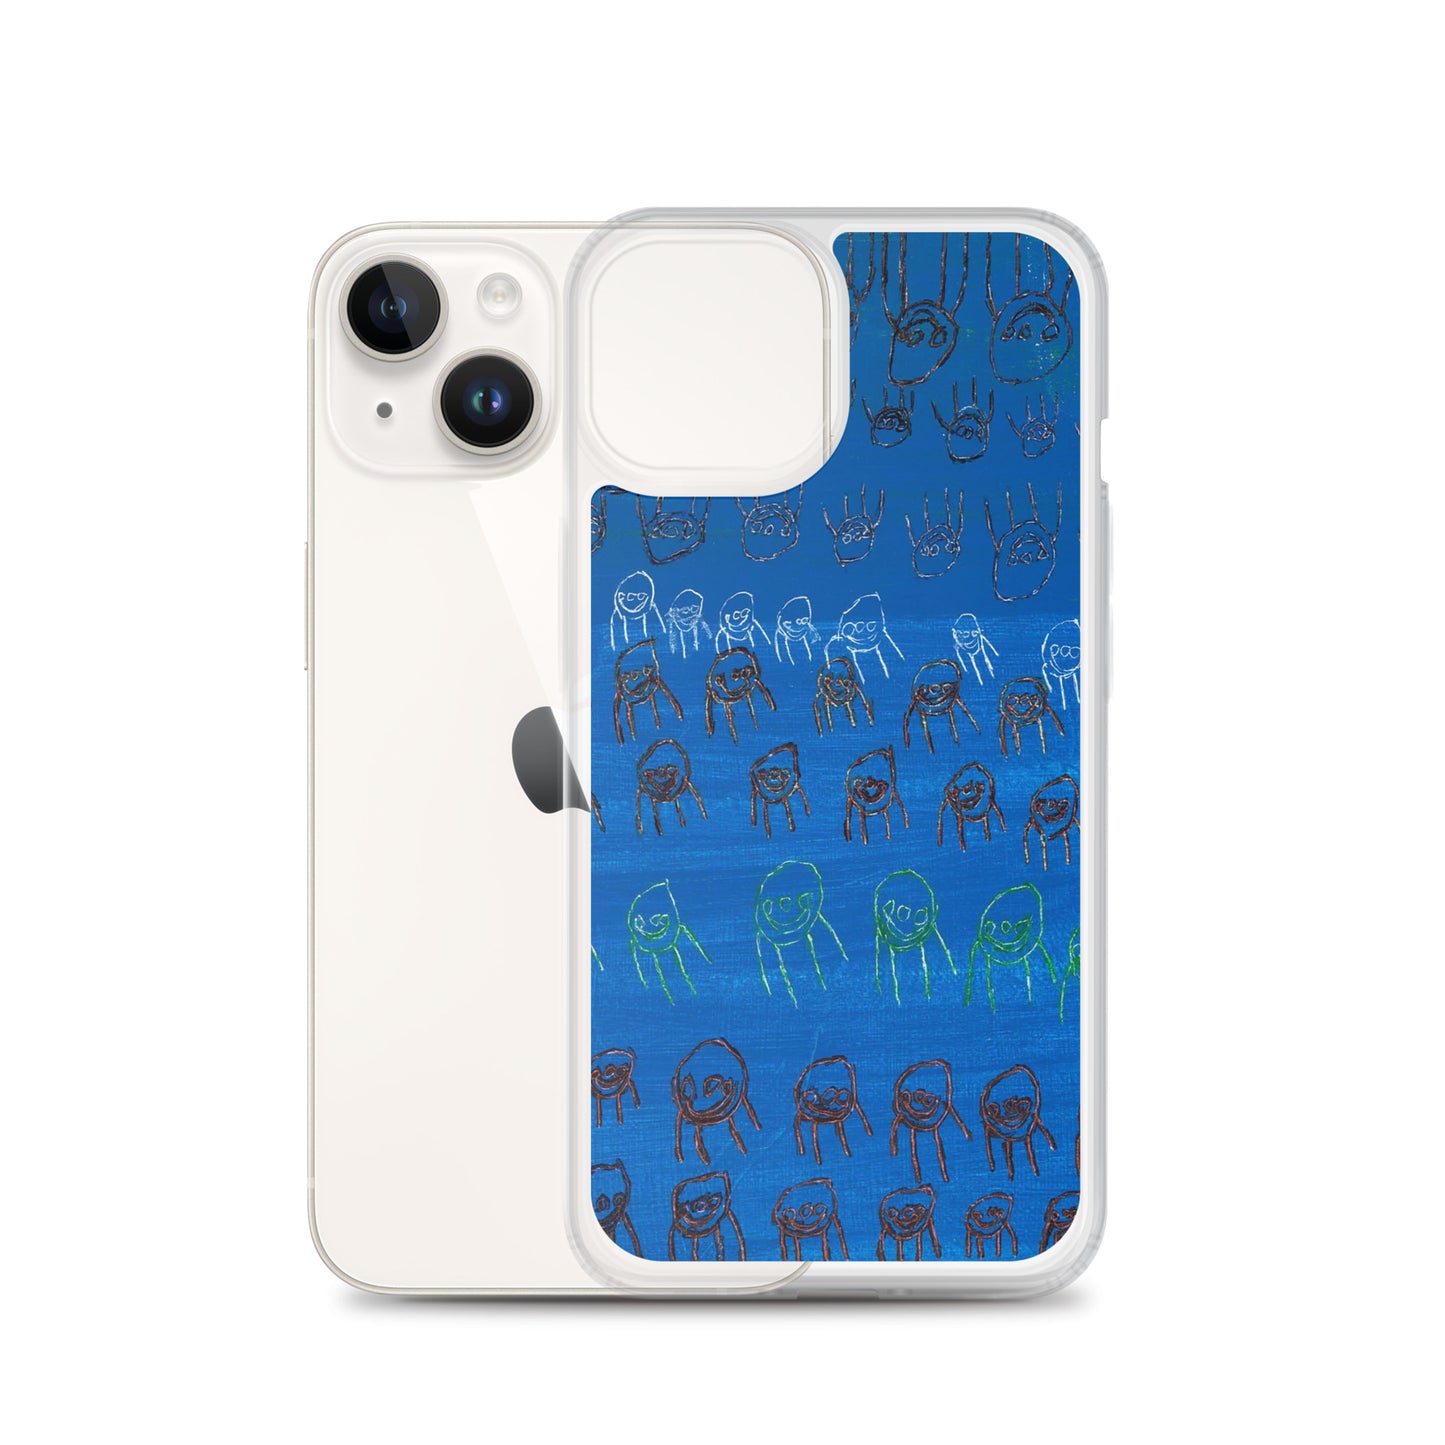 iPhone Case - "Colourful People"